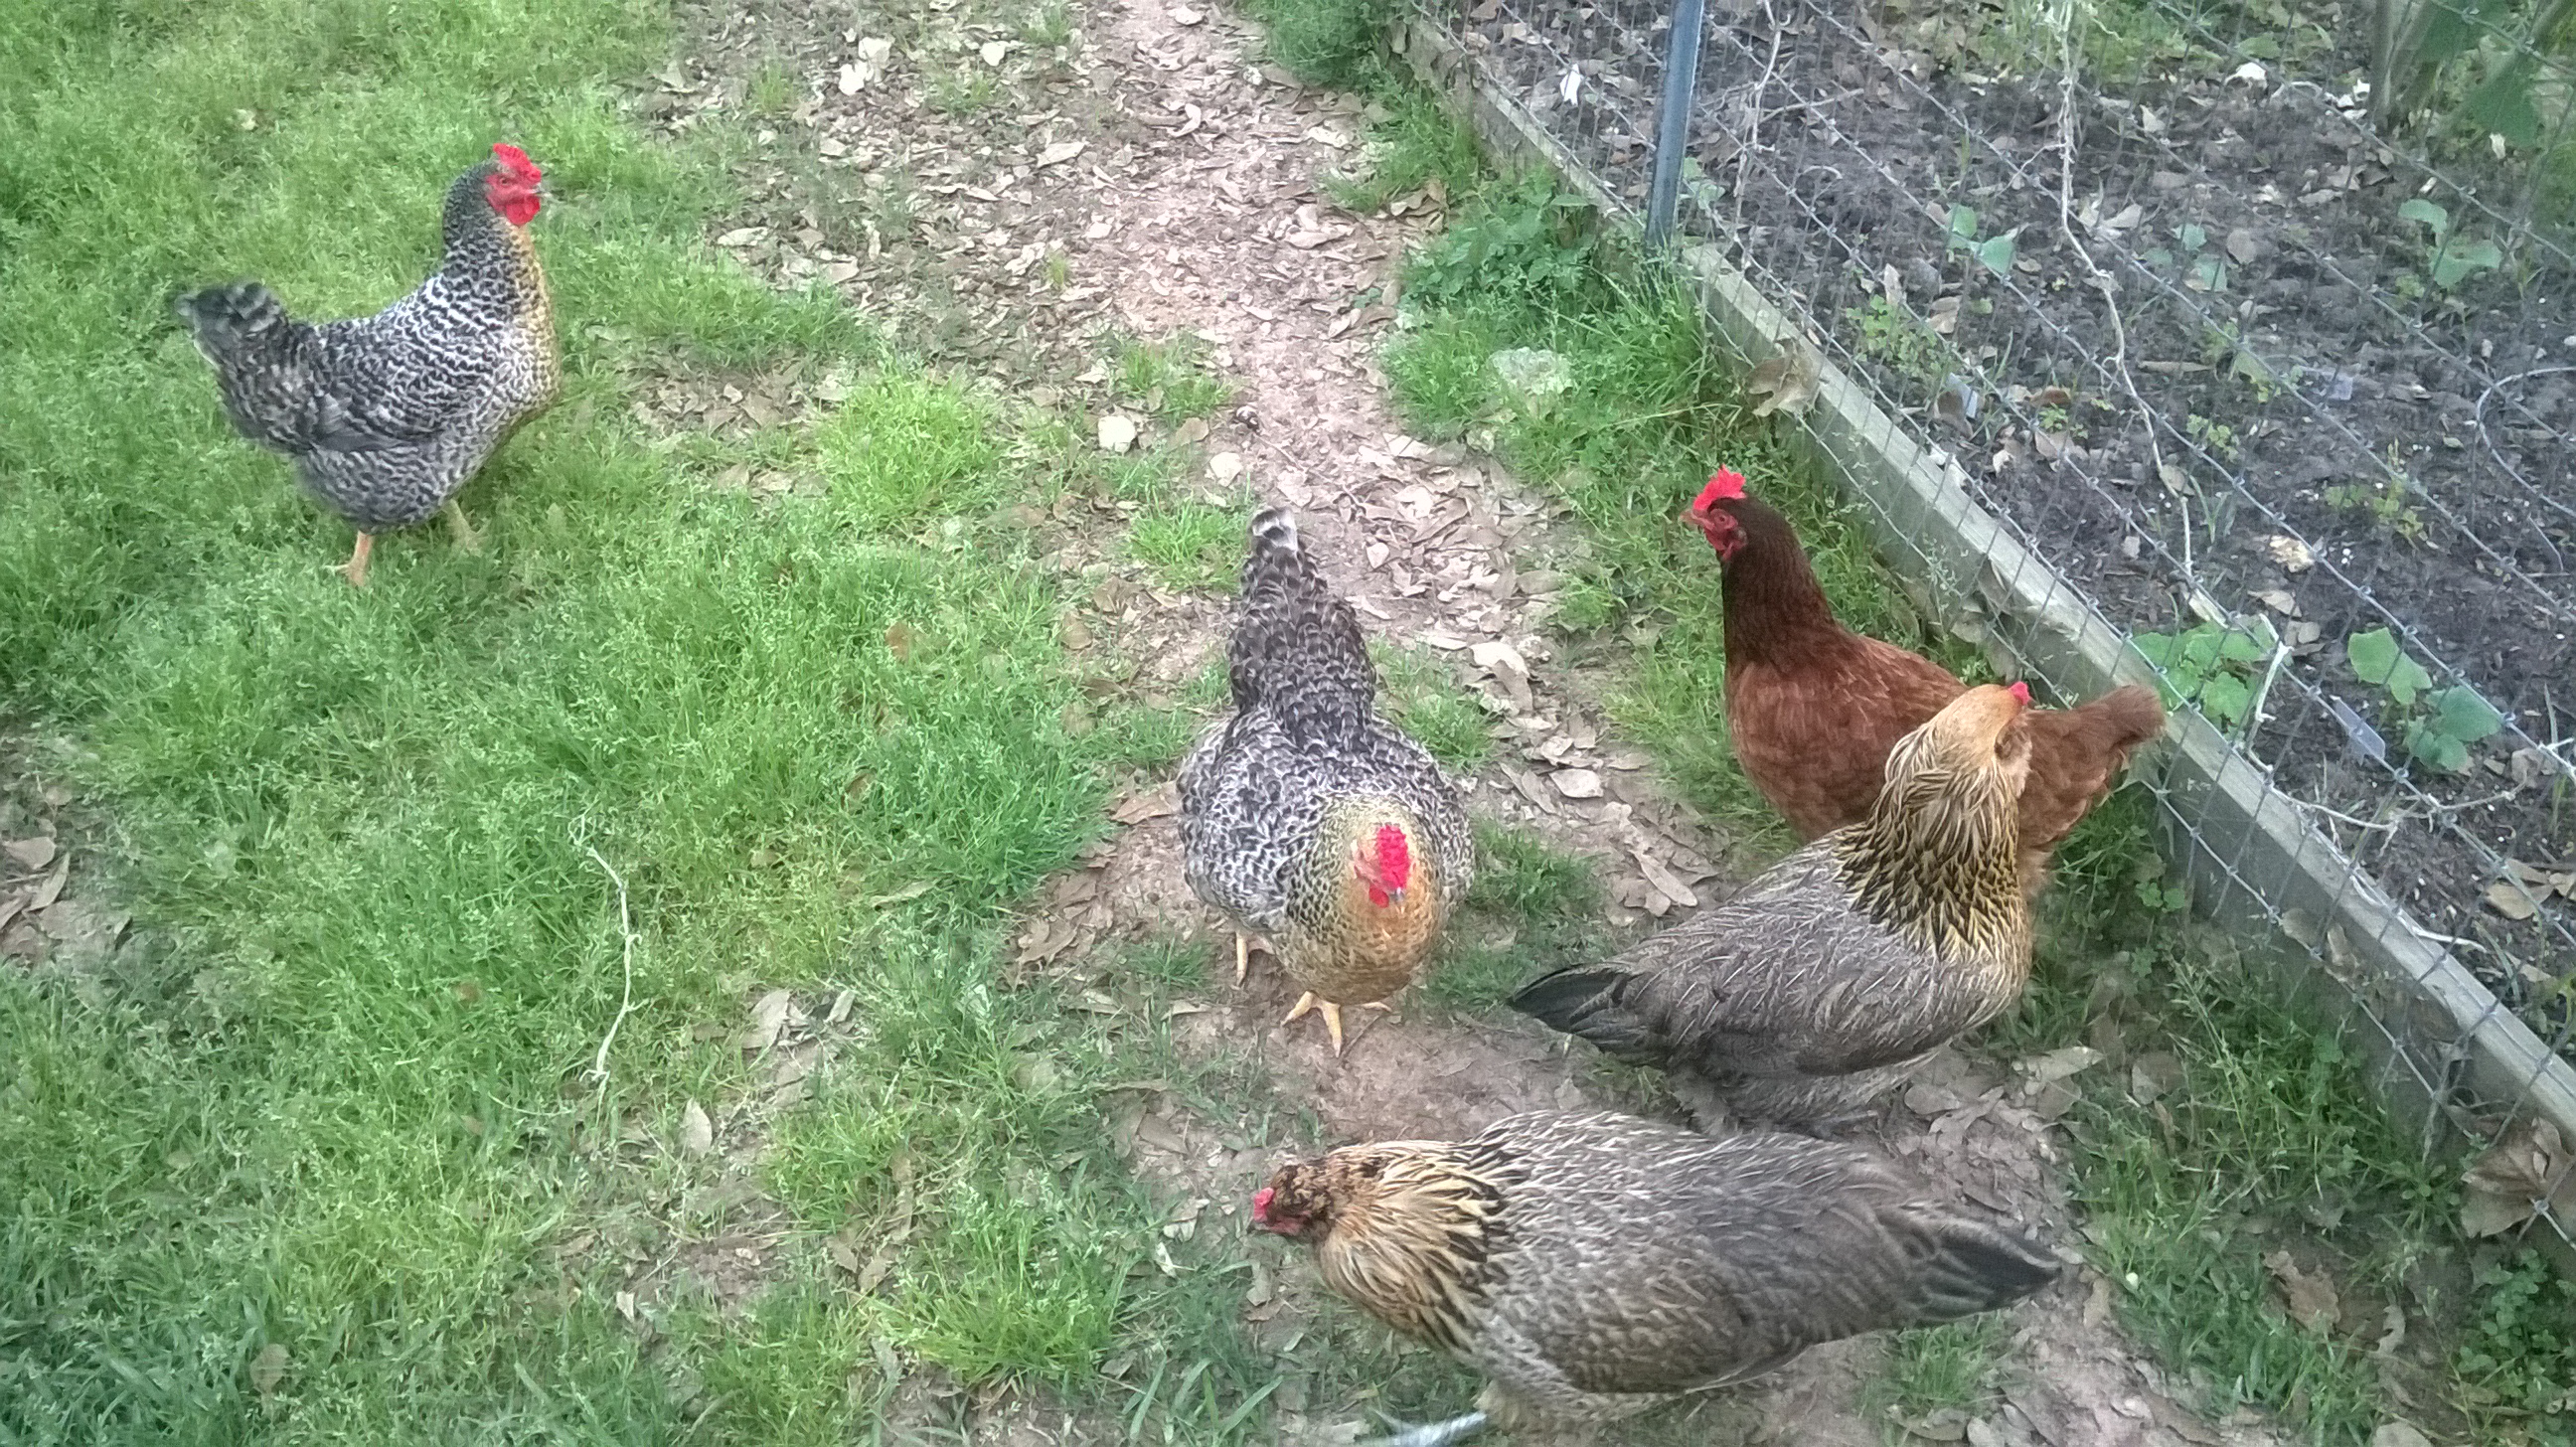 These are all my girls now as of June 2015. Left to right: Icarus, Tootsie, Reba Red, and the twins.